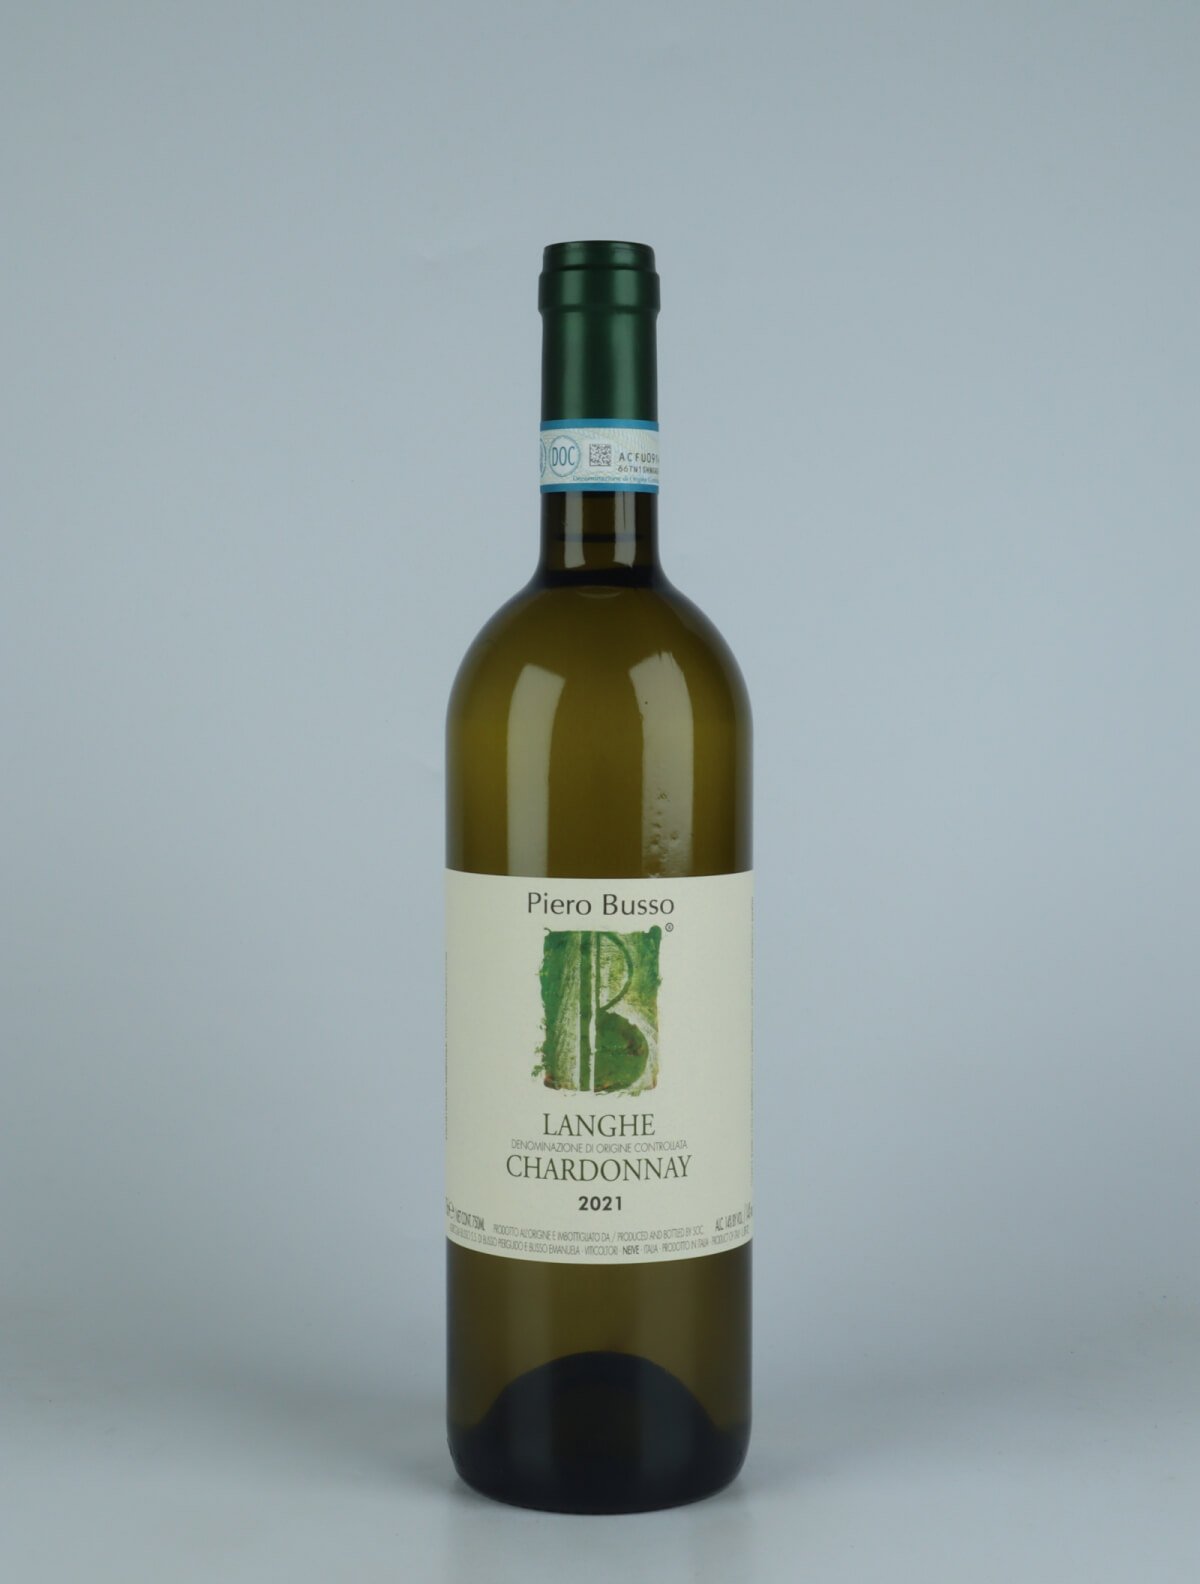 A bottle 2021 Langhe Chardonnay White wine from Piero Busso, Piedmont in Italy